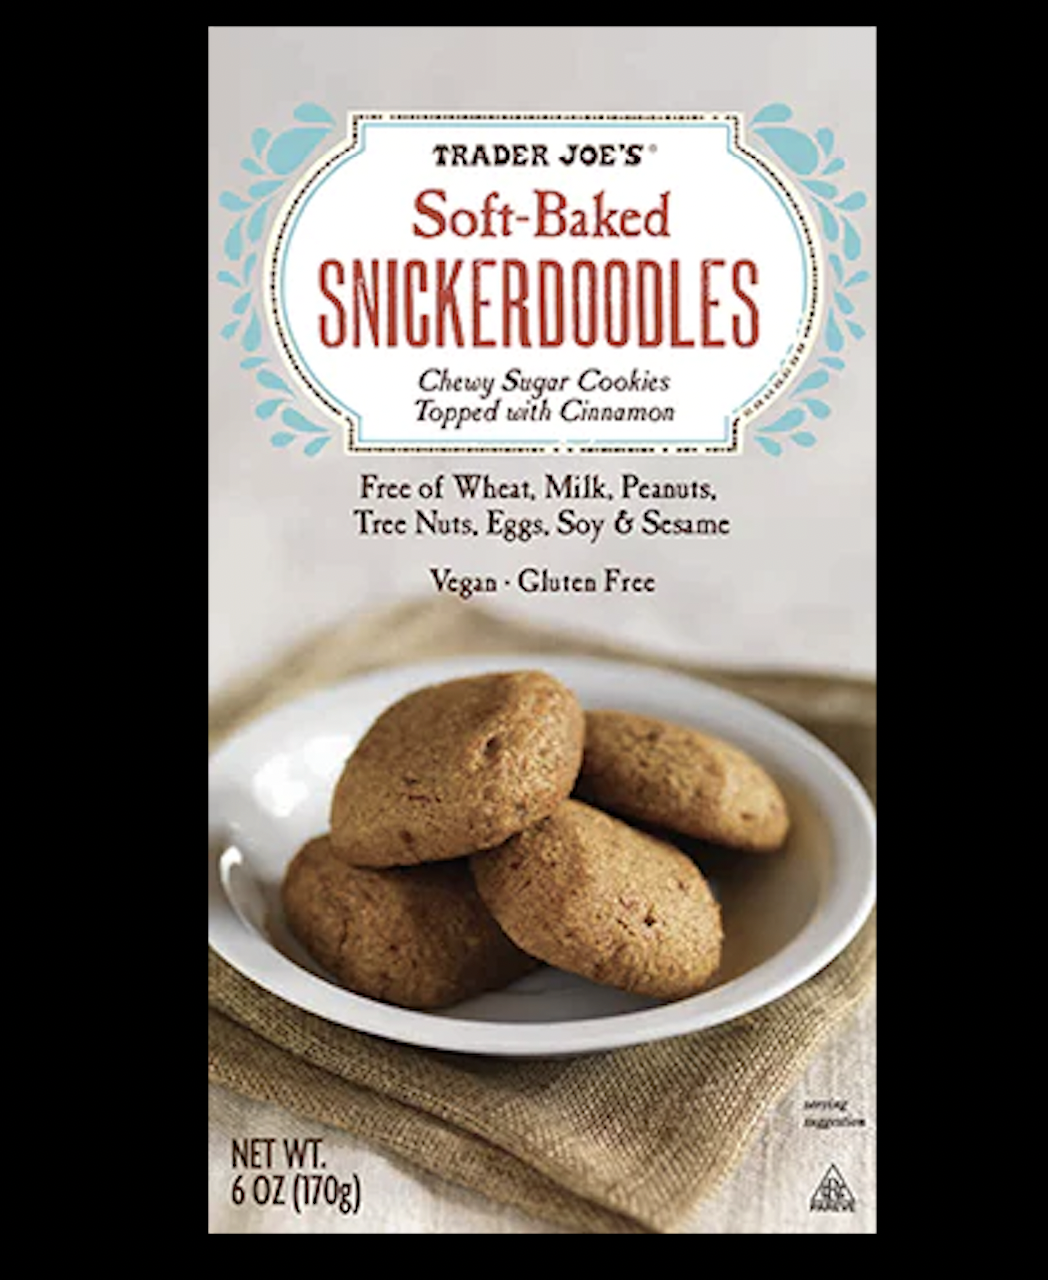 Soft-Baked Snickerdoodles